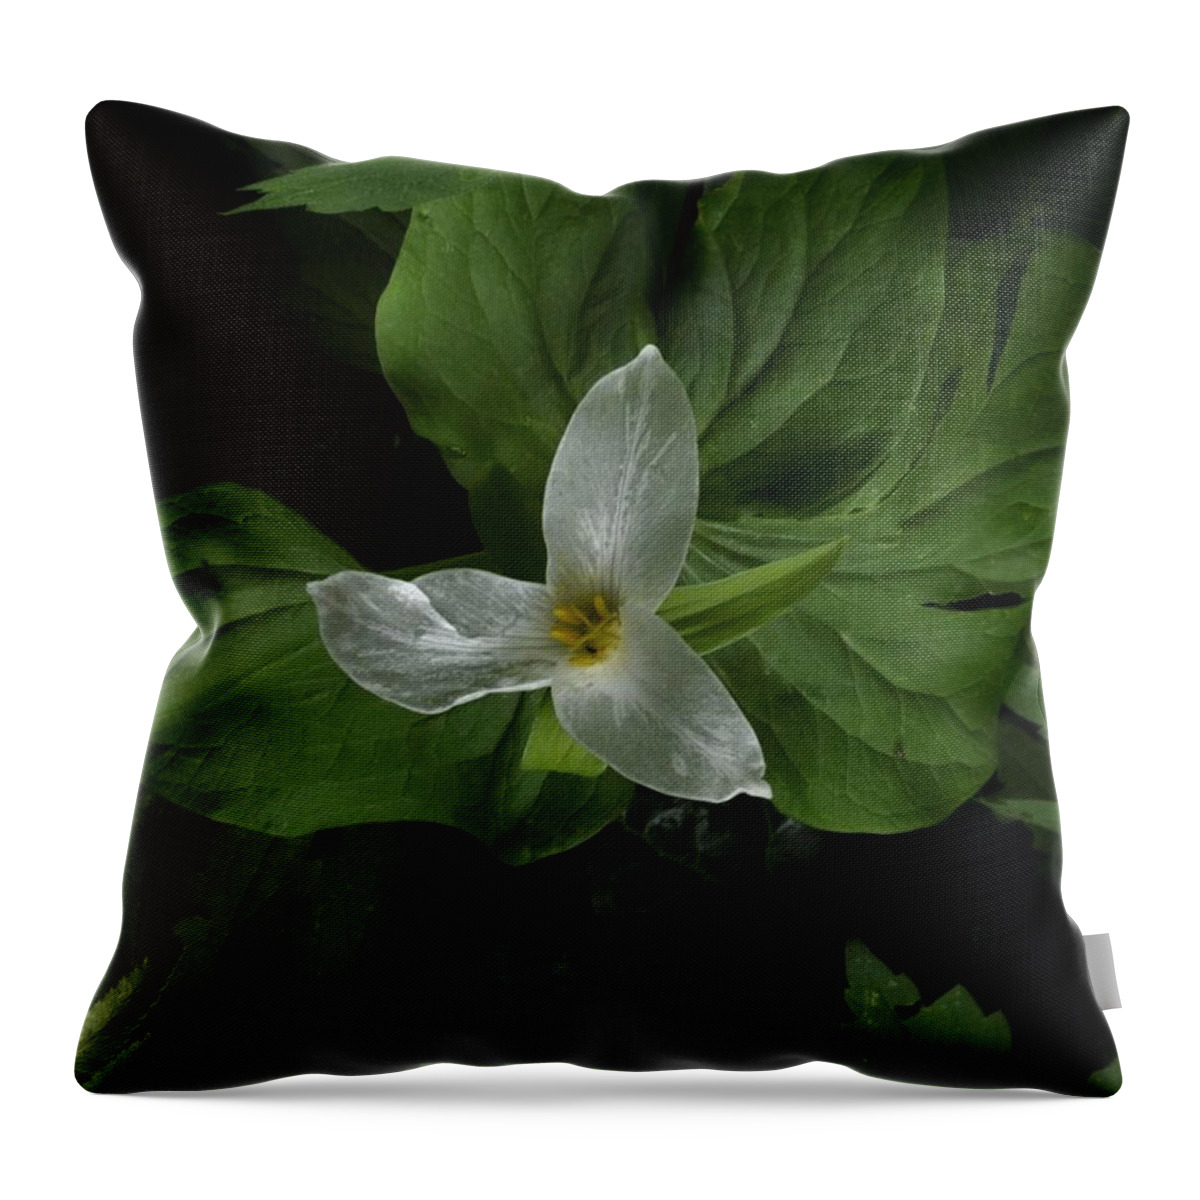 Flowers Throw Pillow featuring the photograph The Delicate Trillium by Charles Lucas